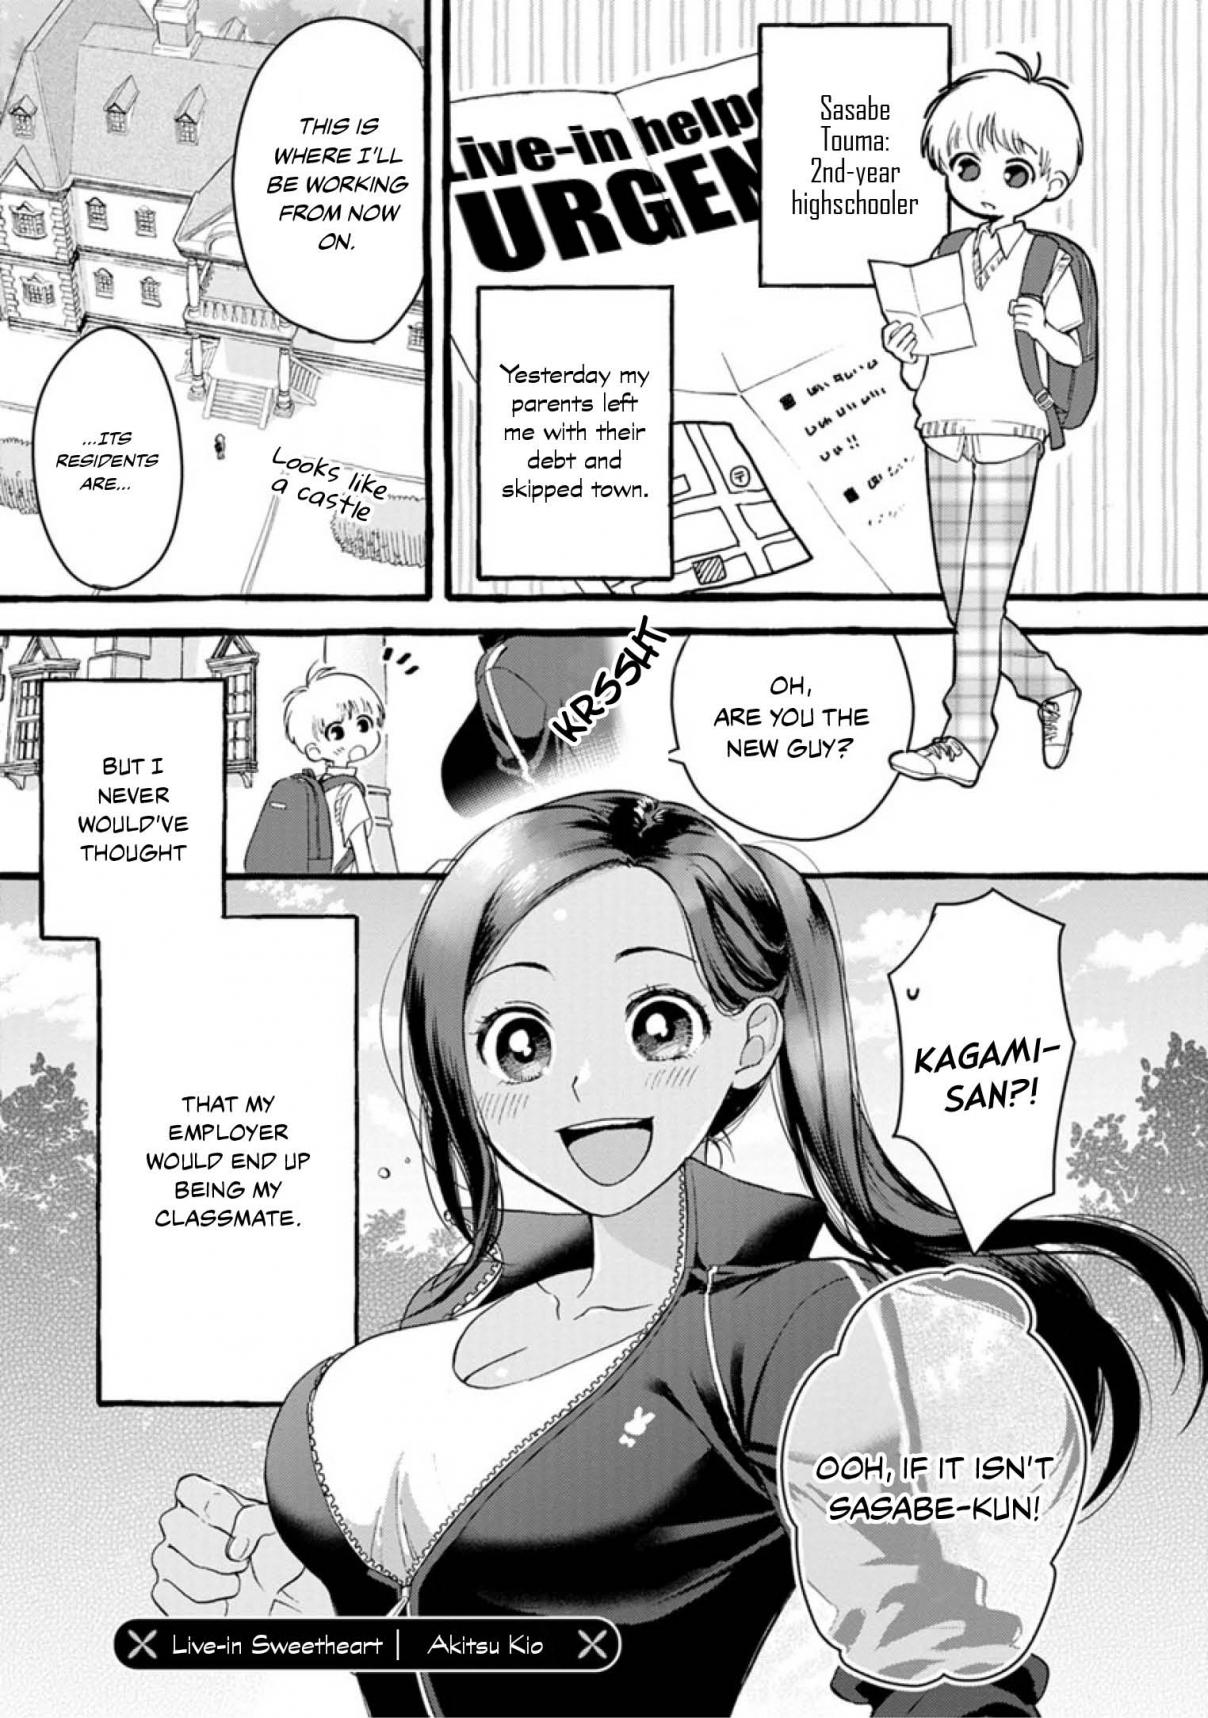 Show me Your Boobies and Look Embarrassed! Vol. 1 Ch. 2 Live in Sweetheart